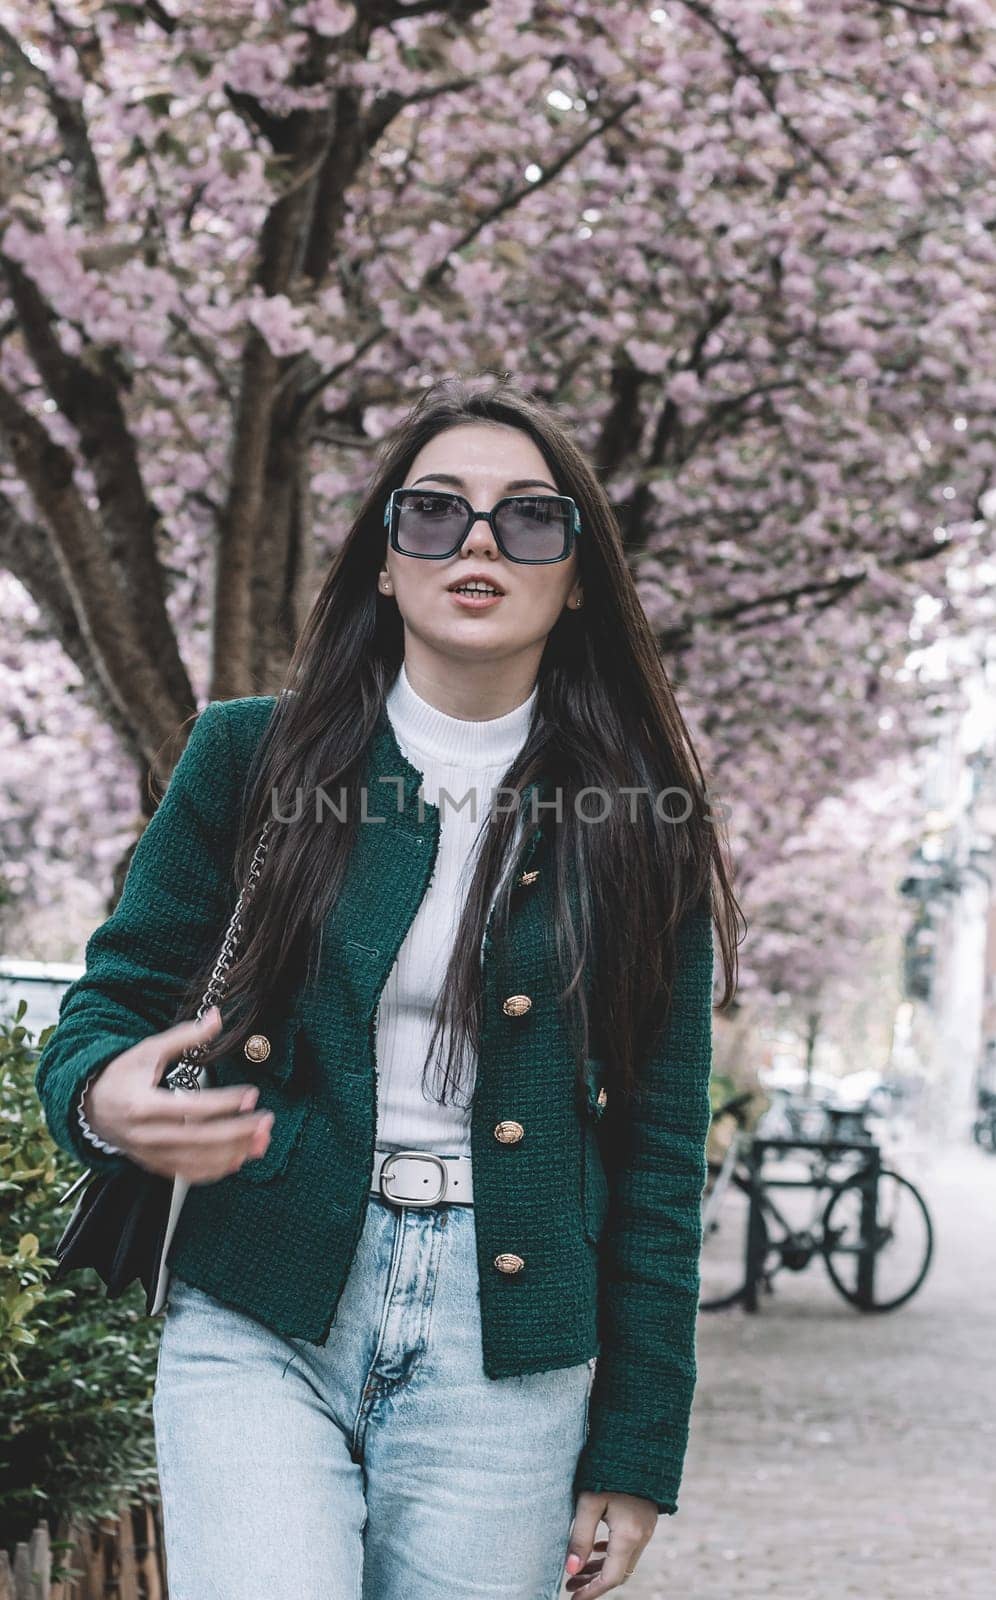 A portrait of one young beautiful Caucasian brunette with long flowing hair in a green jacket and sunglasses, emotionally speaking, walks along a city street with blooming sakura trees on a spring day, close-up view from below.